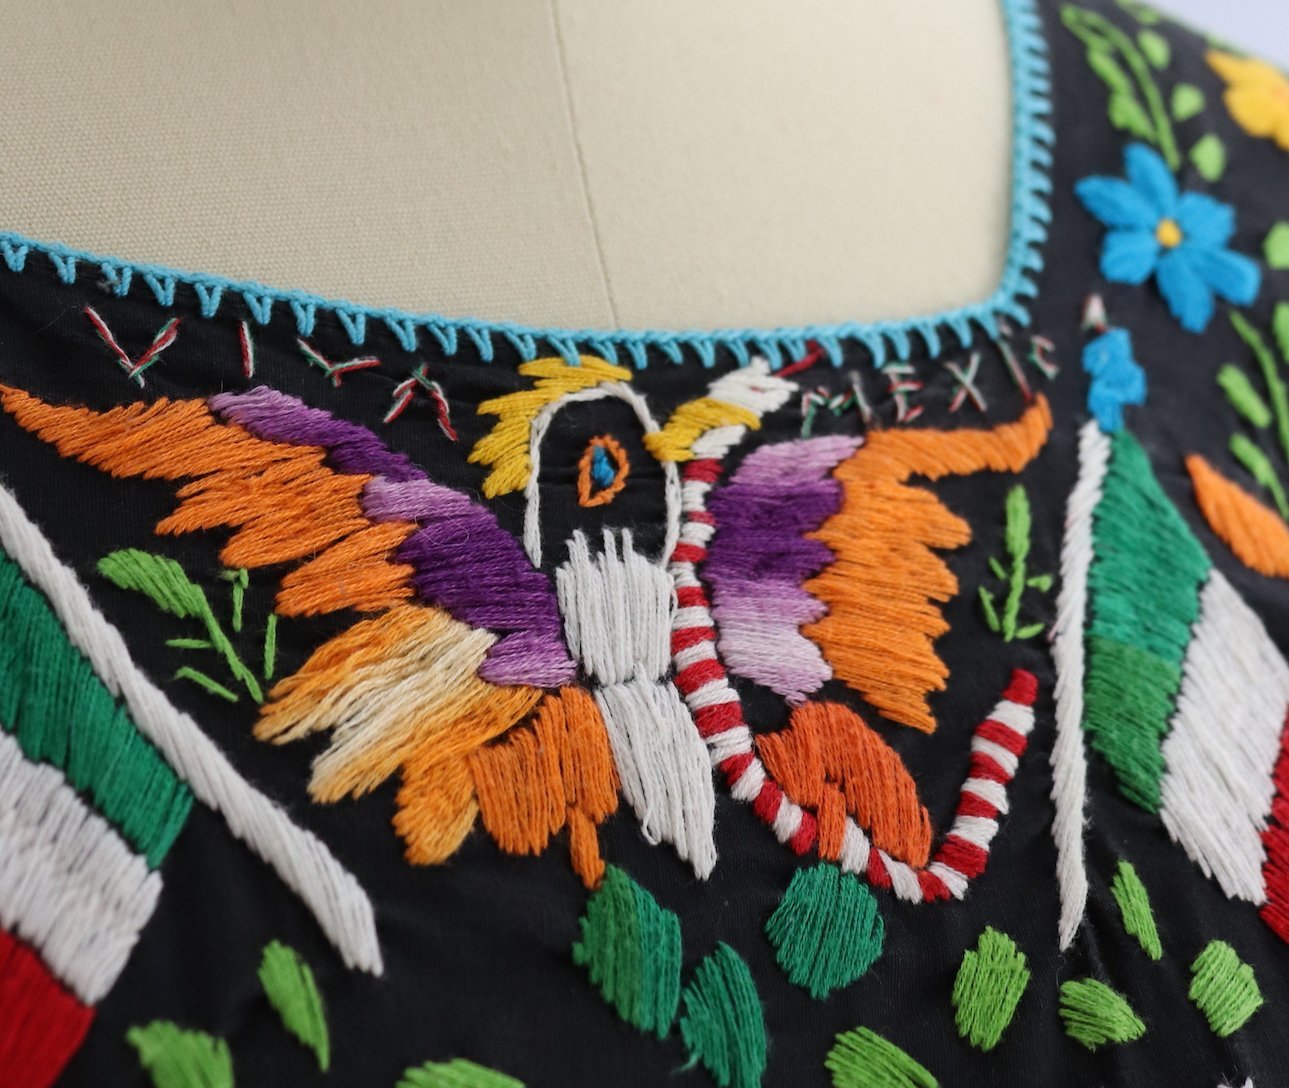 Vintage 1970s Oaxacan Mexican Embroidered Caftan Dress / Viva Mexico - ThisBlueBird